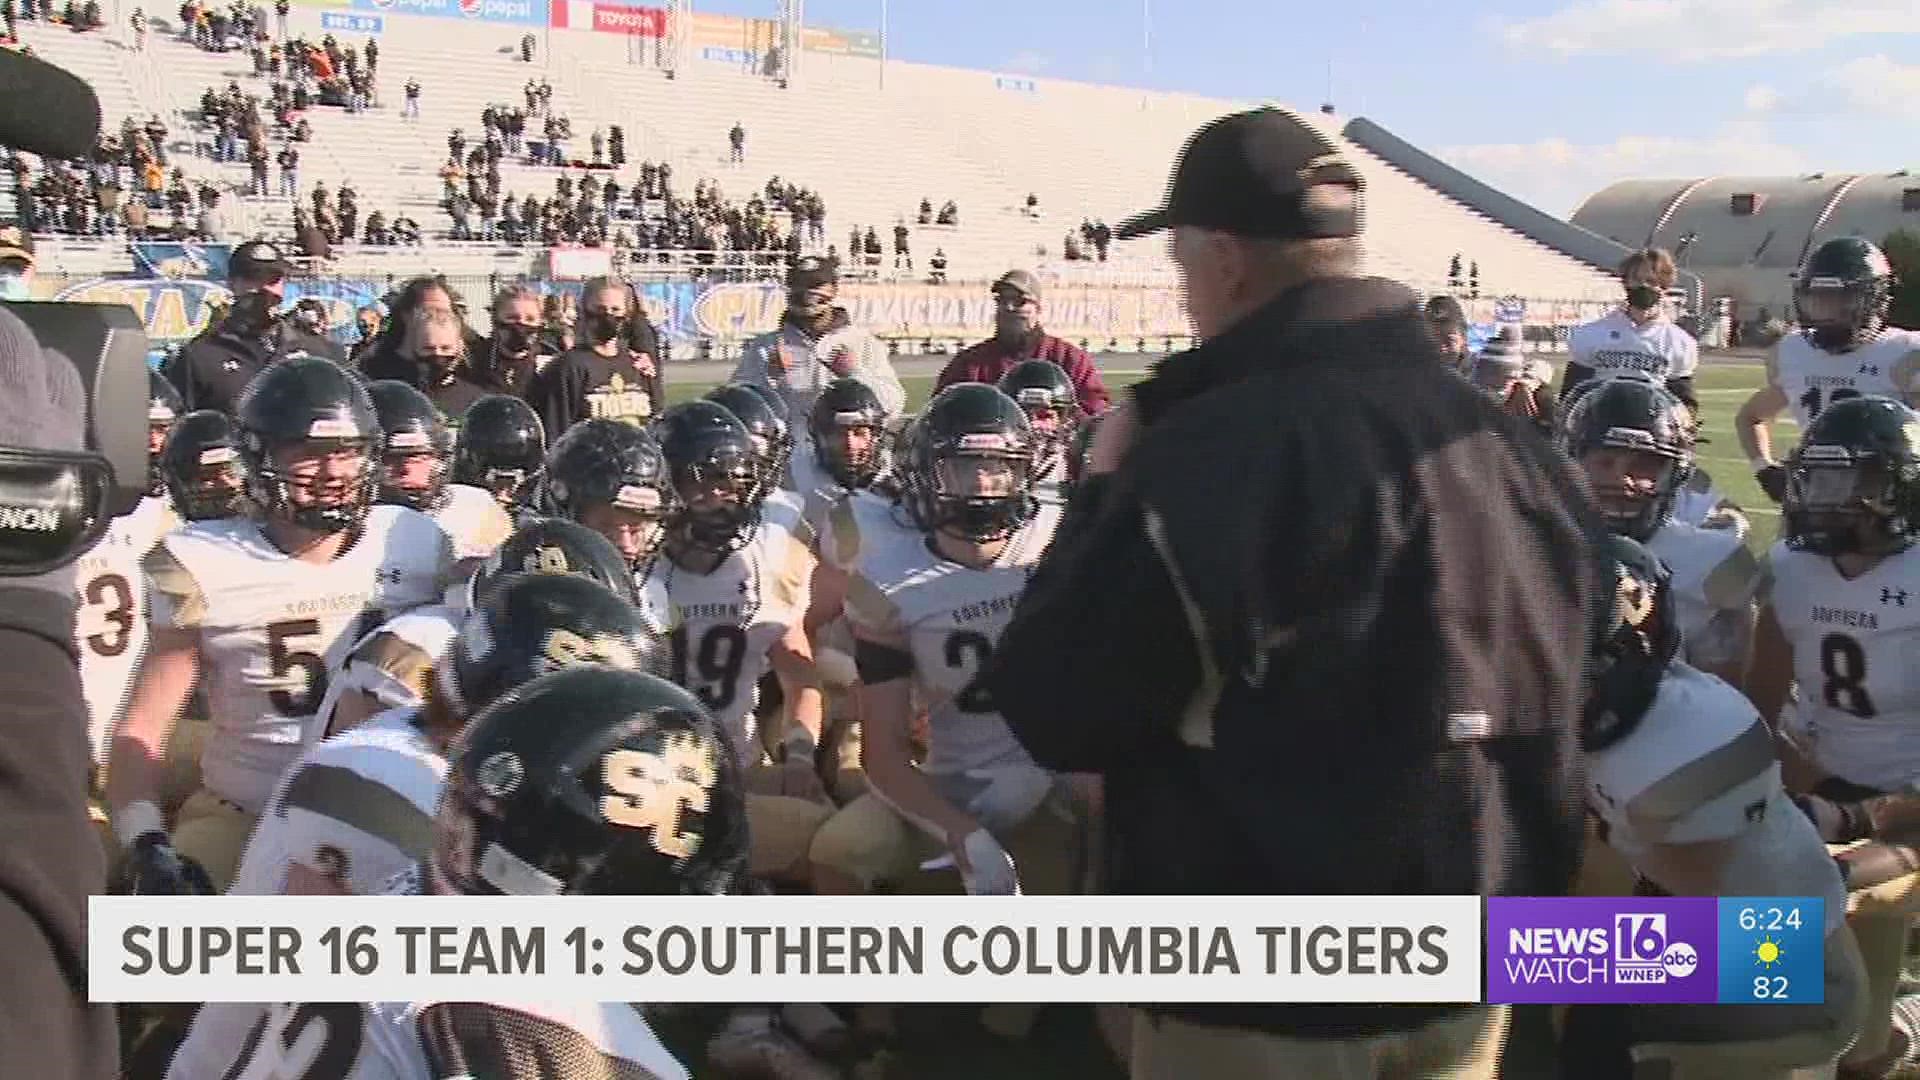 Super 16 Team 1: Southern Columbia Tigers